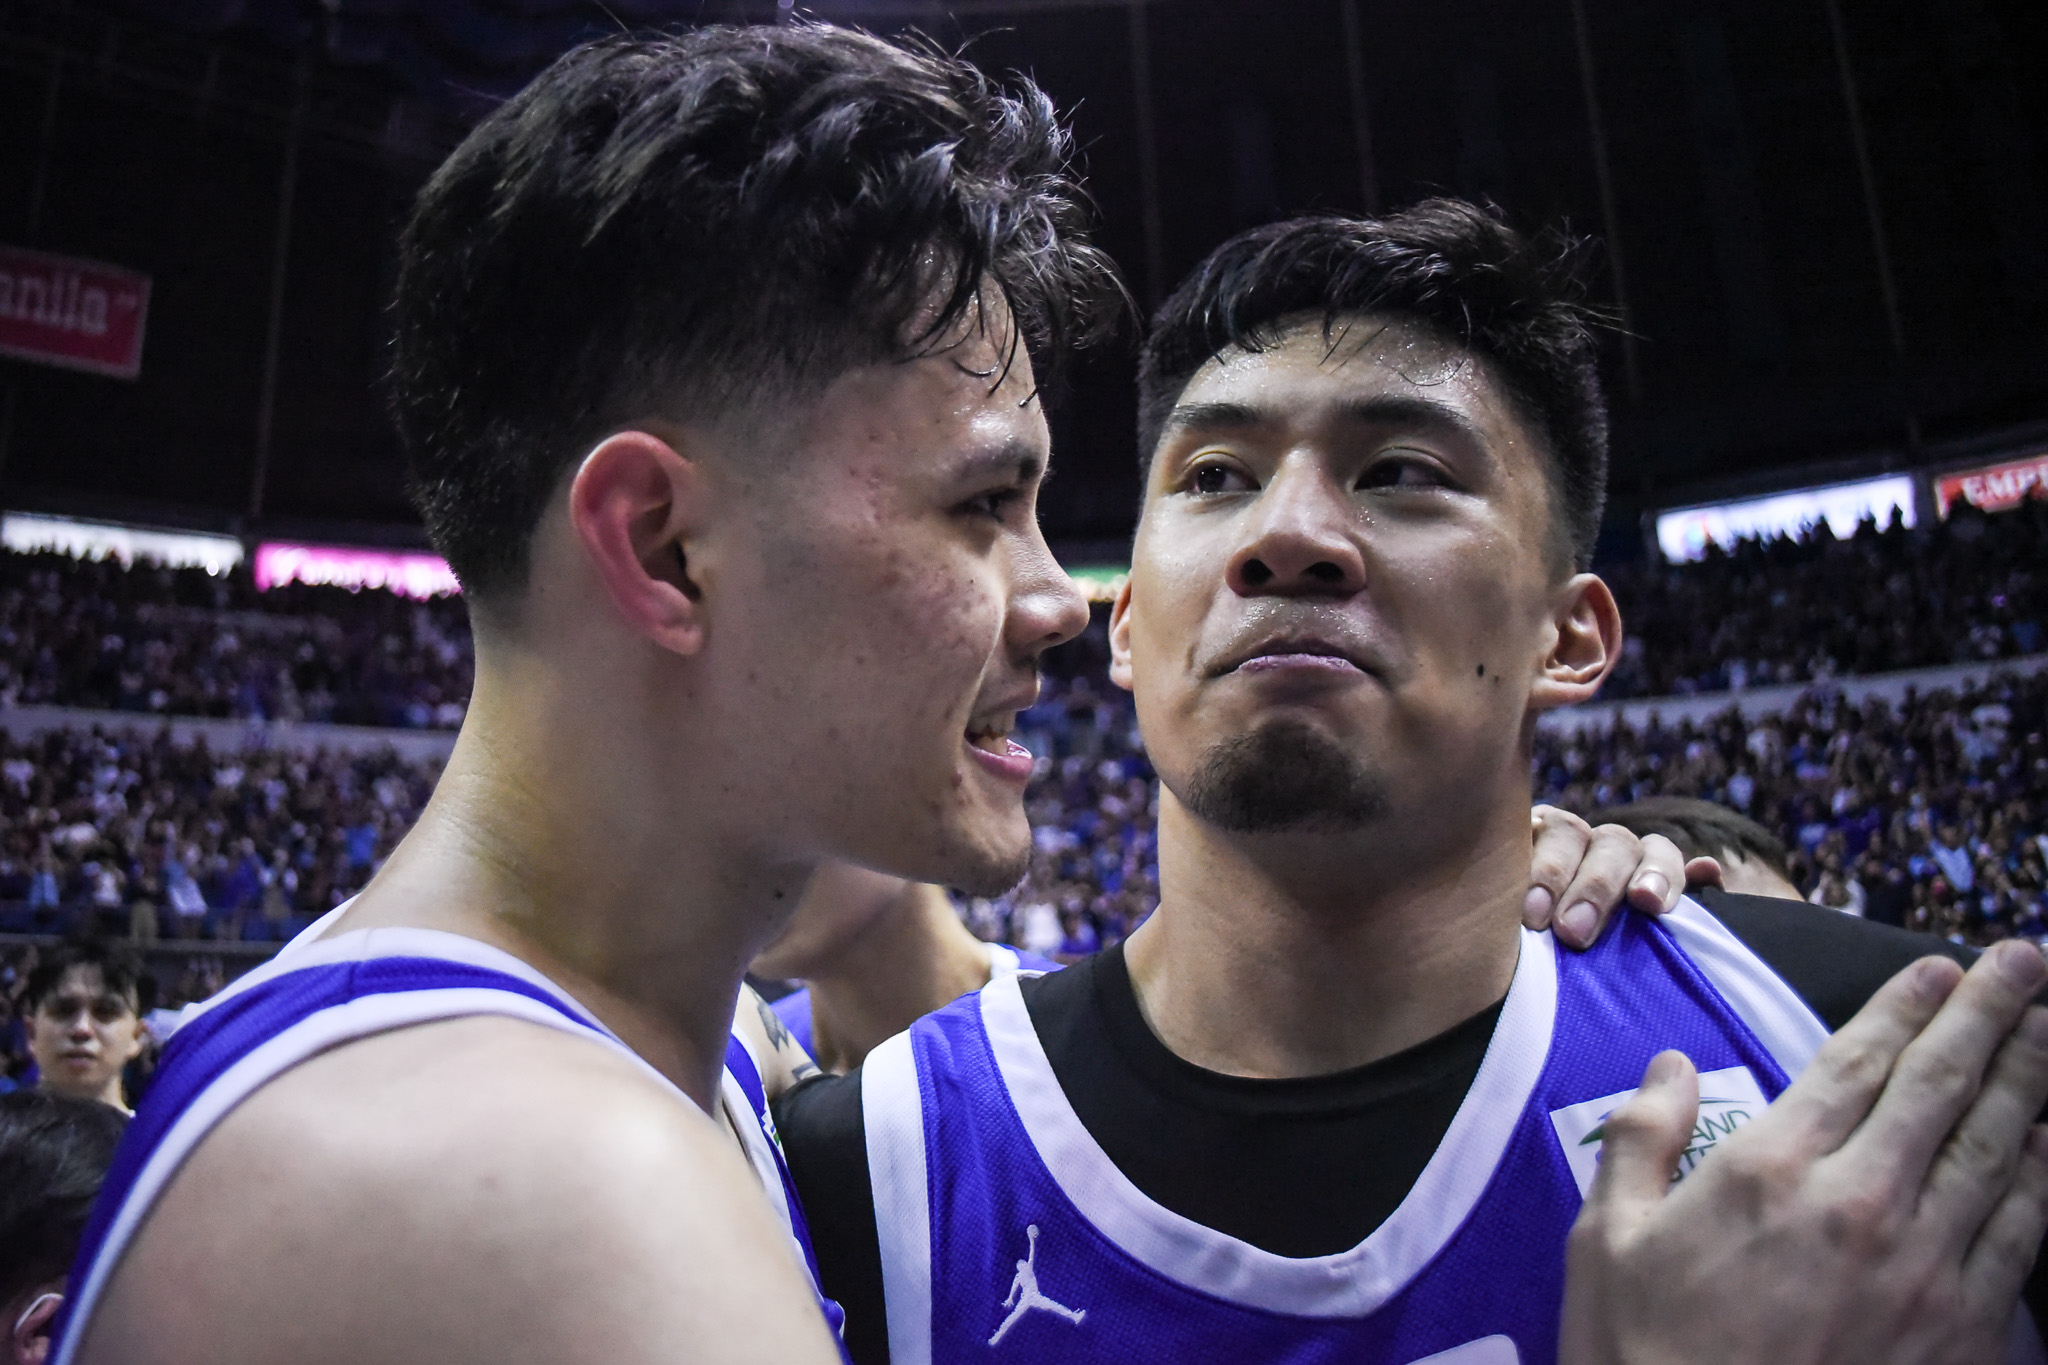 UAAP-85-MBB-Finals-G3-ADMU-vs.-UP-Matthew-Daves-1340 Matthew Daves opts out of final year in Ateneo ADMU Basketball News UAAP  - philippine sports news